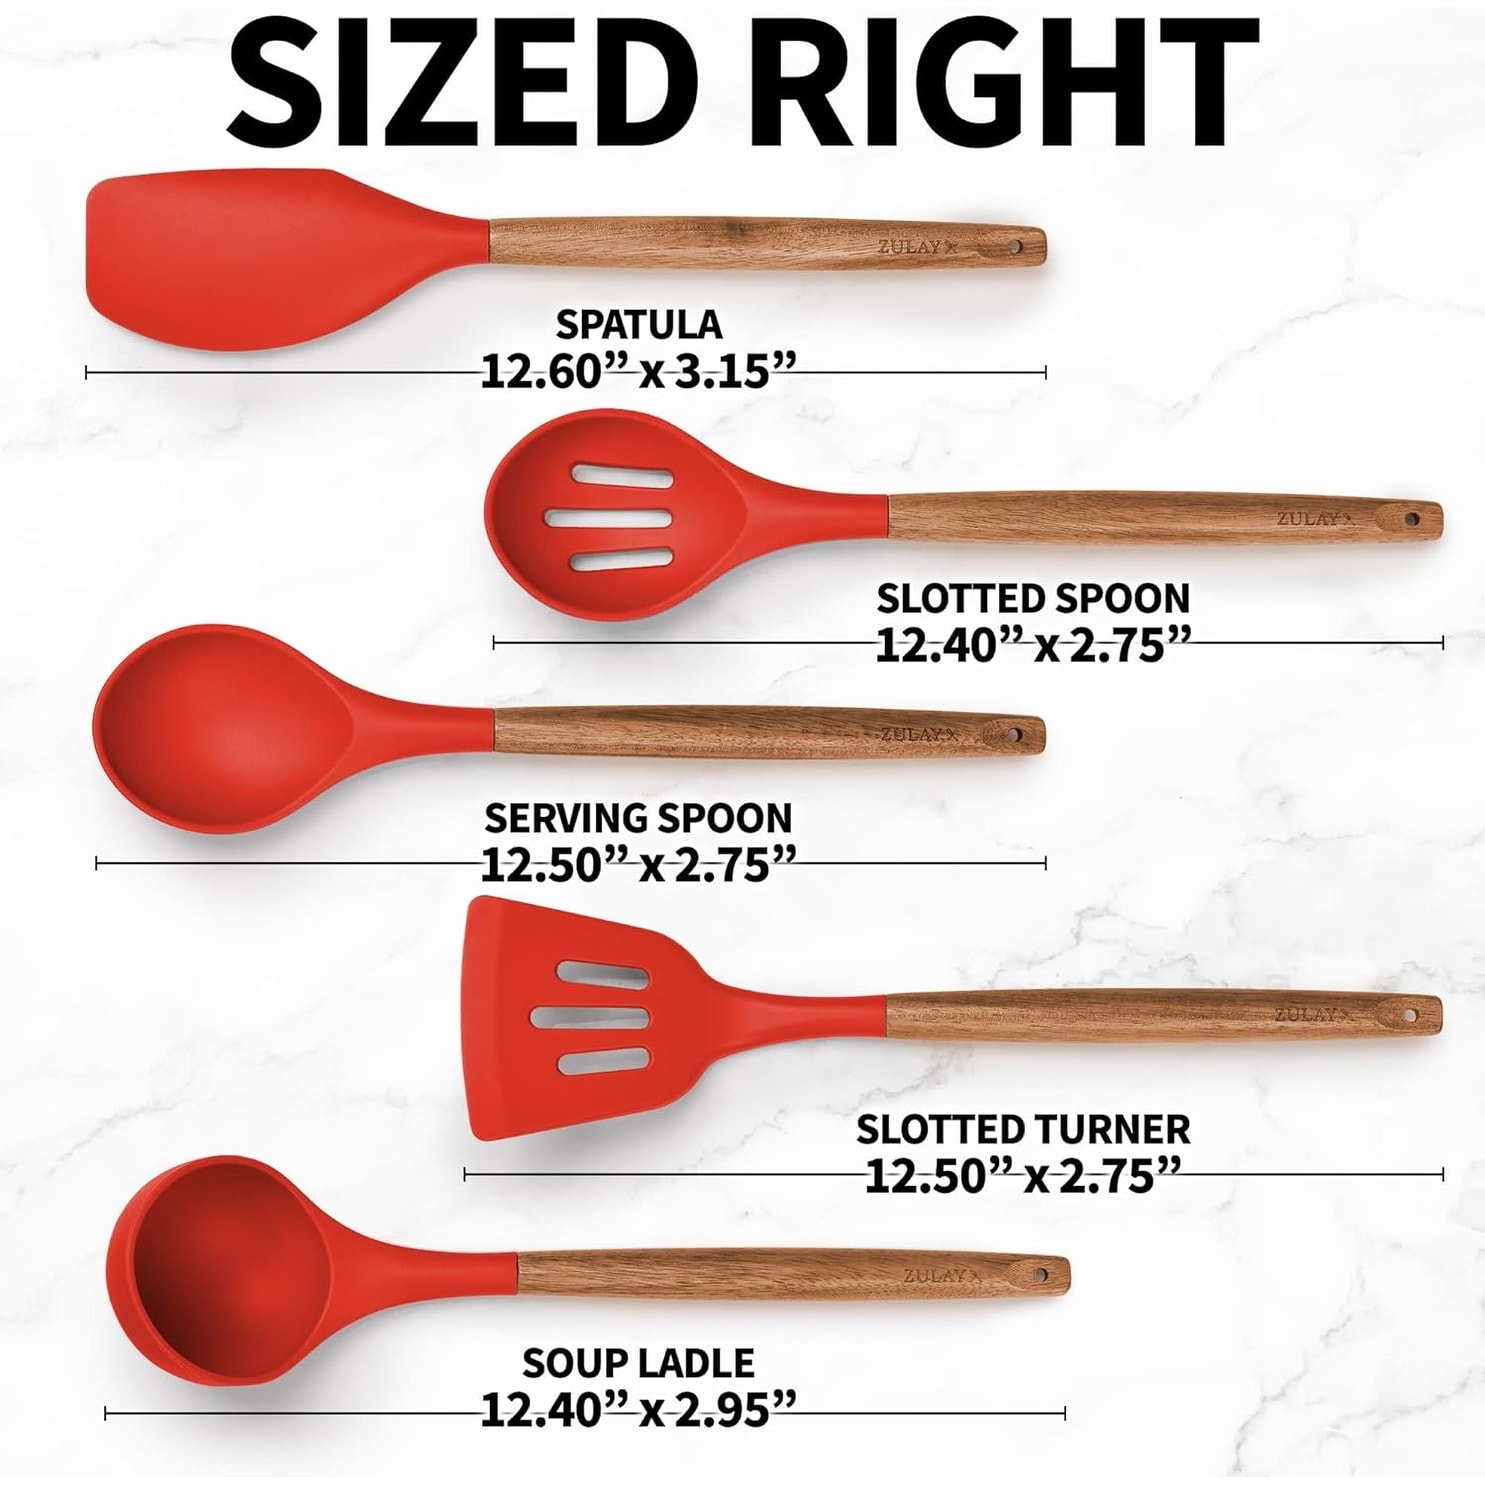 https://ak1.ostkcdn.com/images/products/is/images/direct/40f87769d6f86901bd81094c28368b8bfe6c77ae/Zulay-Kitchen-Premium-5-Piece-Silicone-Utensils-Set-with-Authentic-Acacia-Hardwood-Handles.jpg